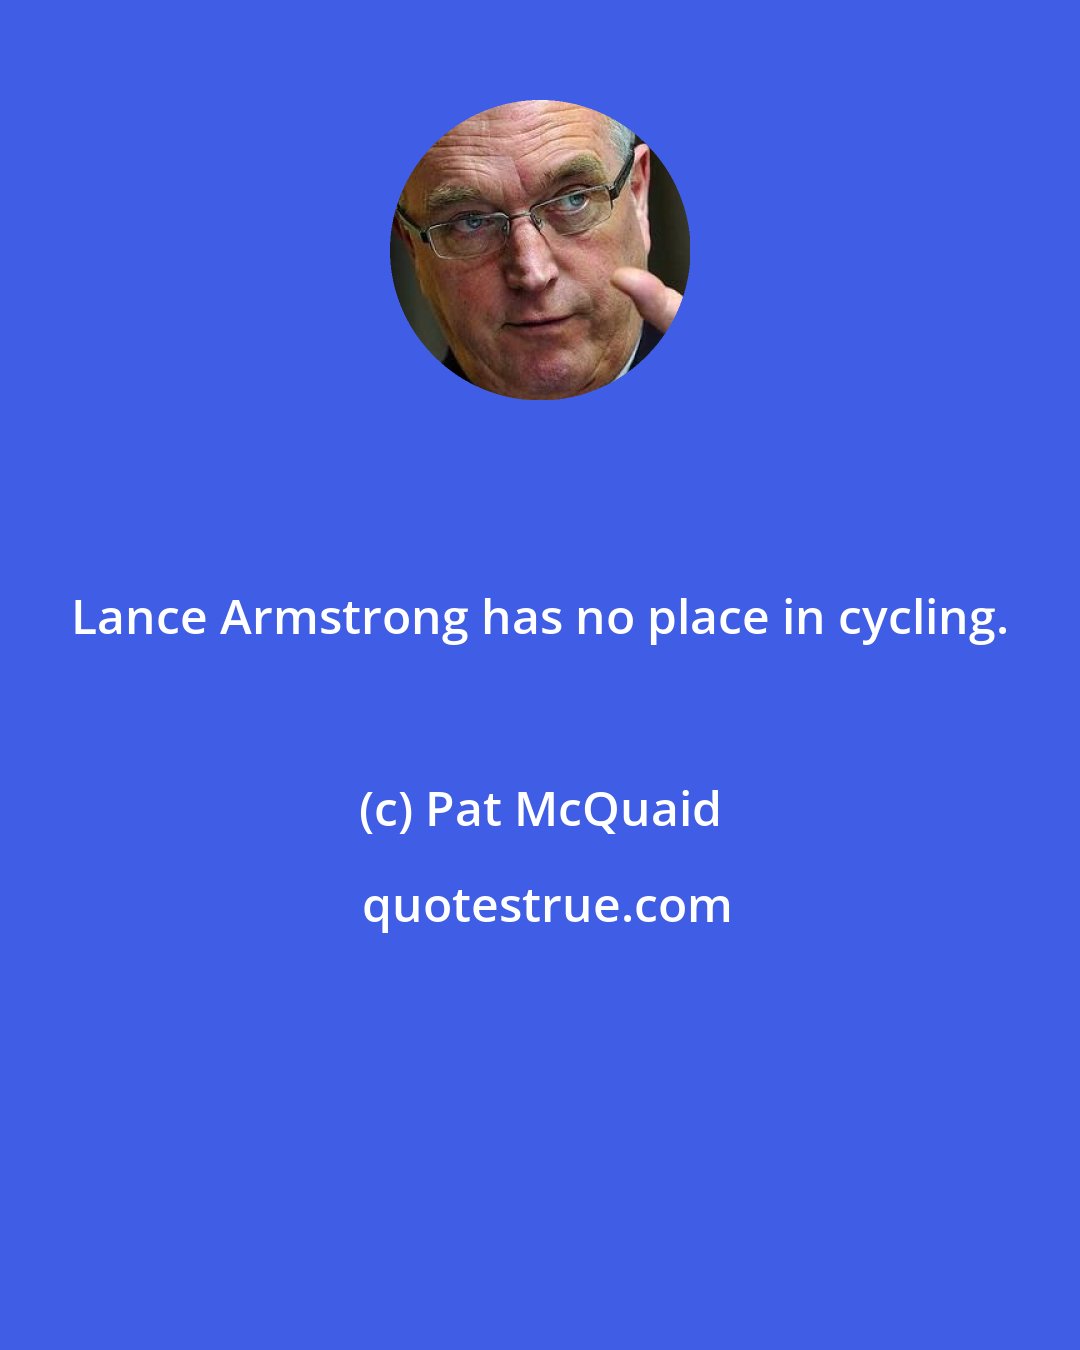 Pat McQuaid: Lance Armstrong has no place in cycling.